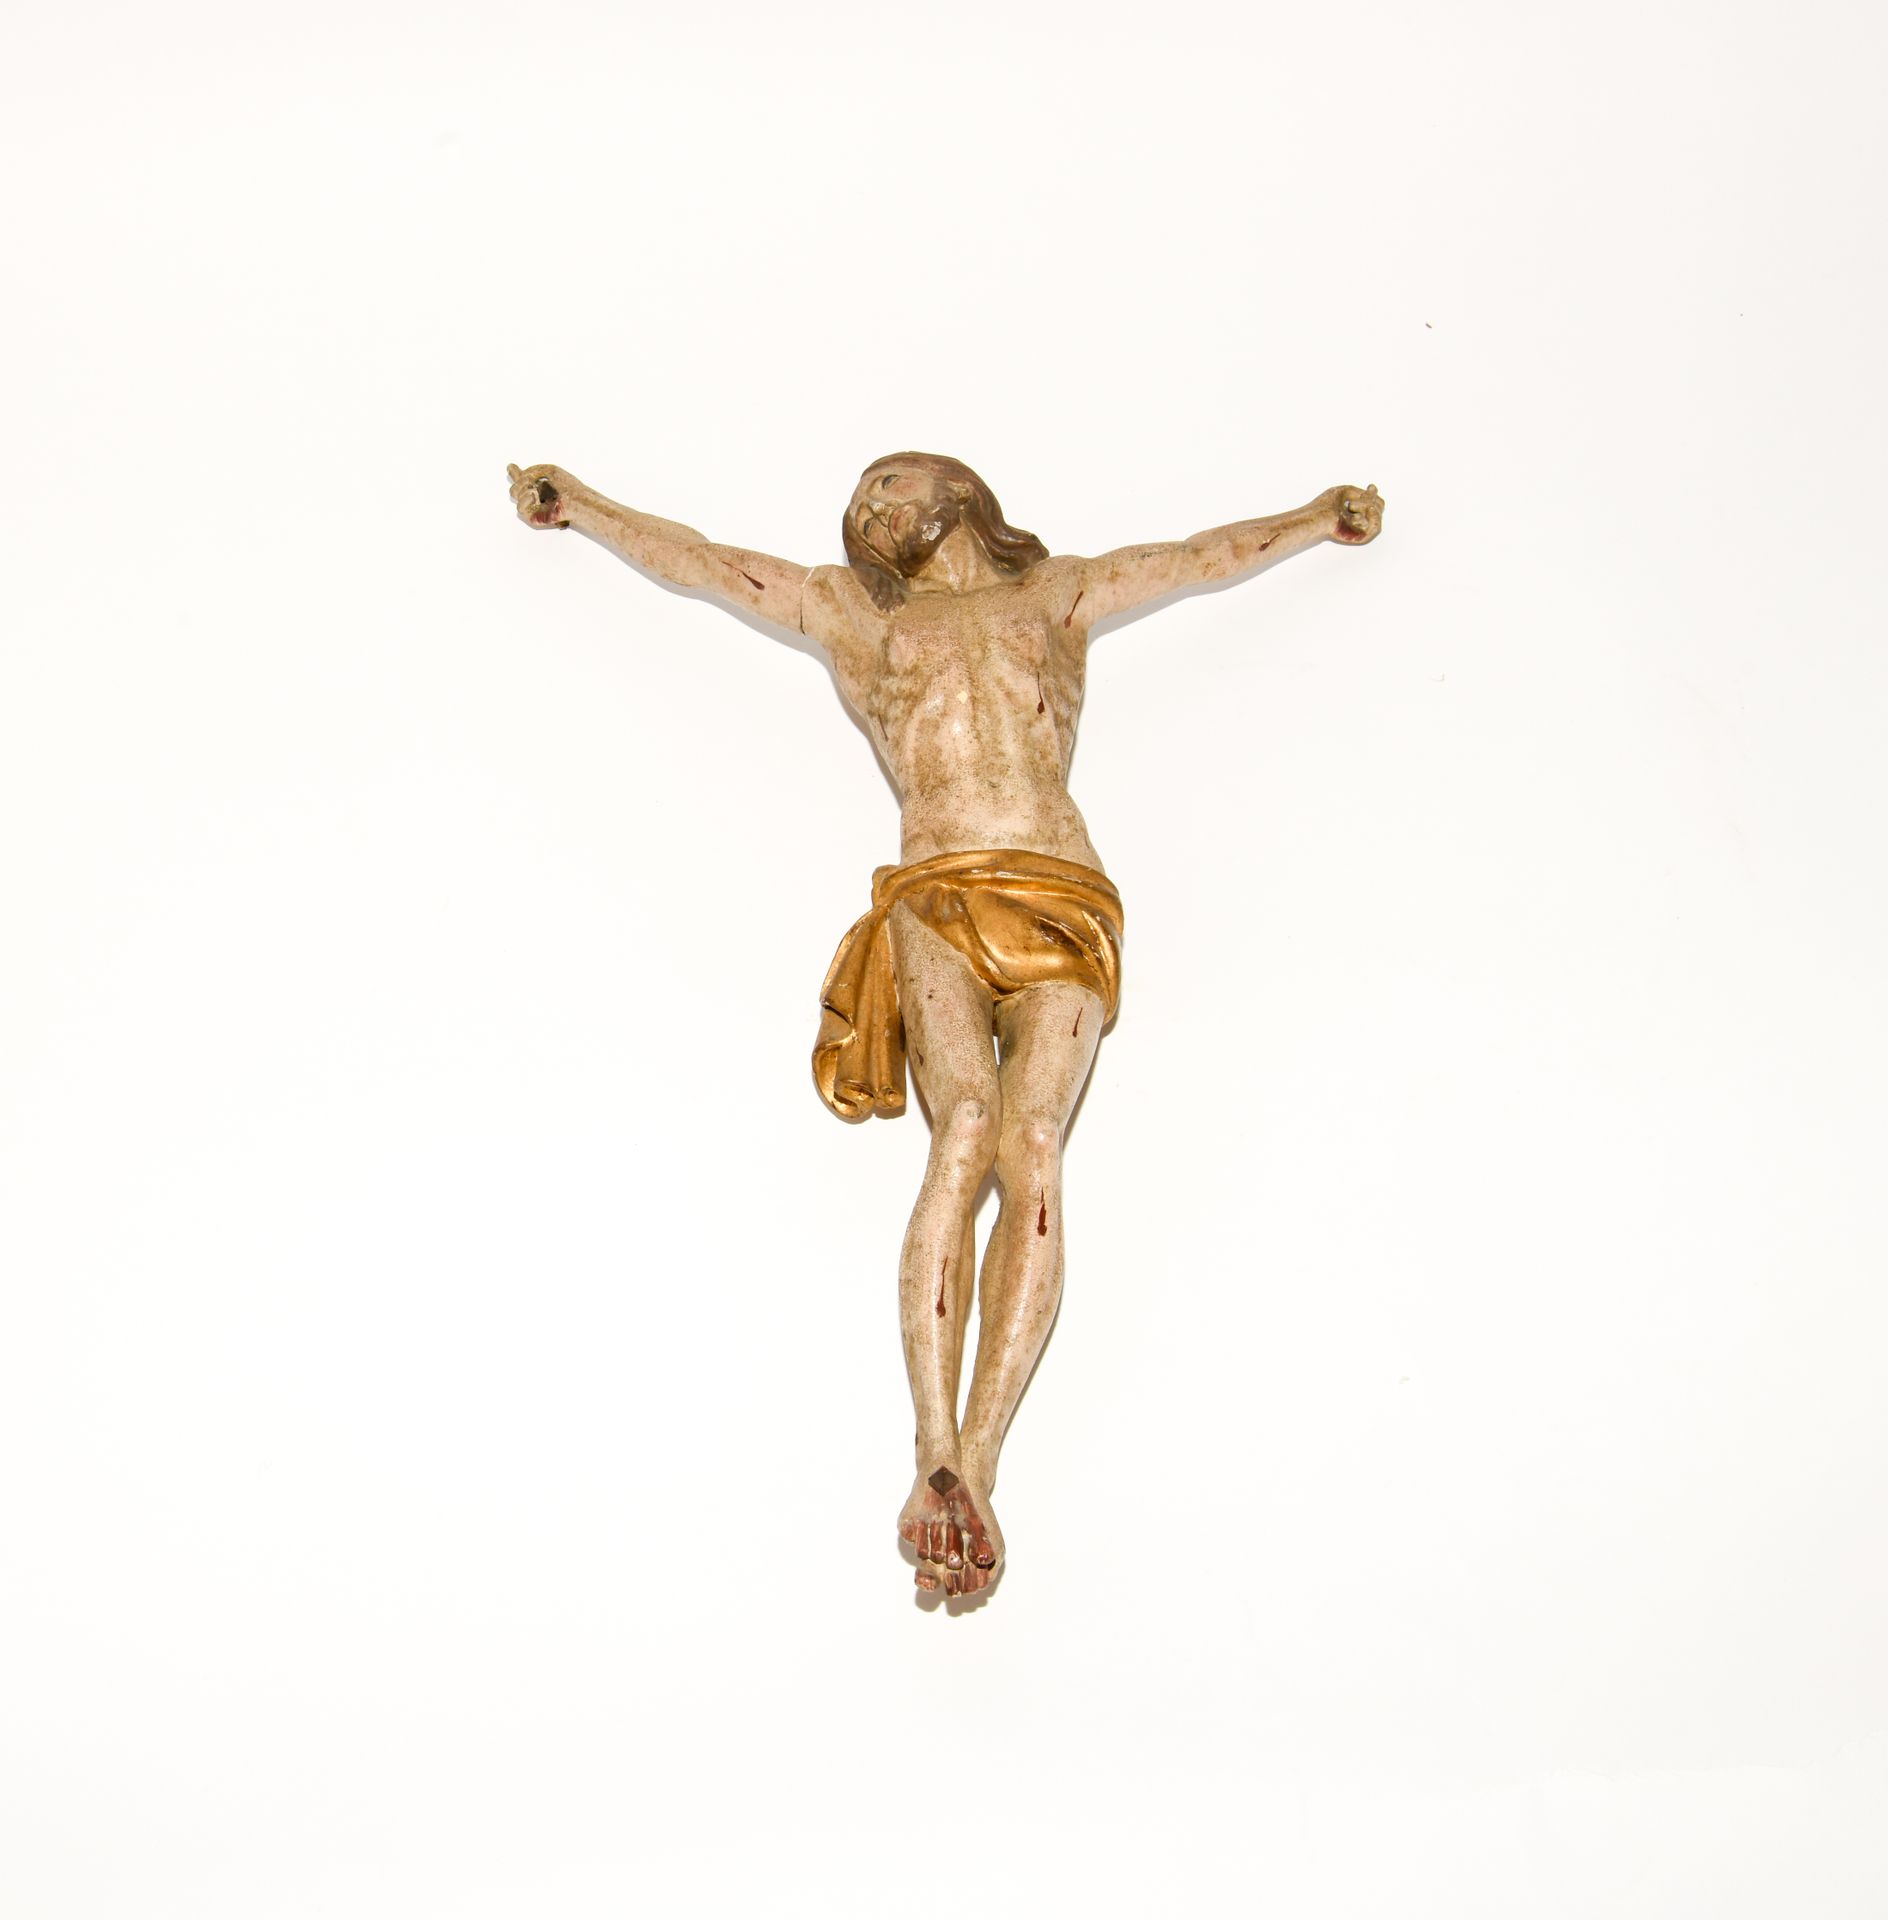 Null Christ in polychrome wood, gilded perizonium

Savoy, early 19th century

Di&hellip;